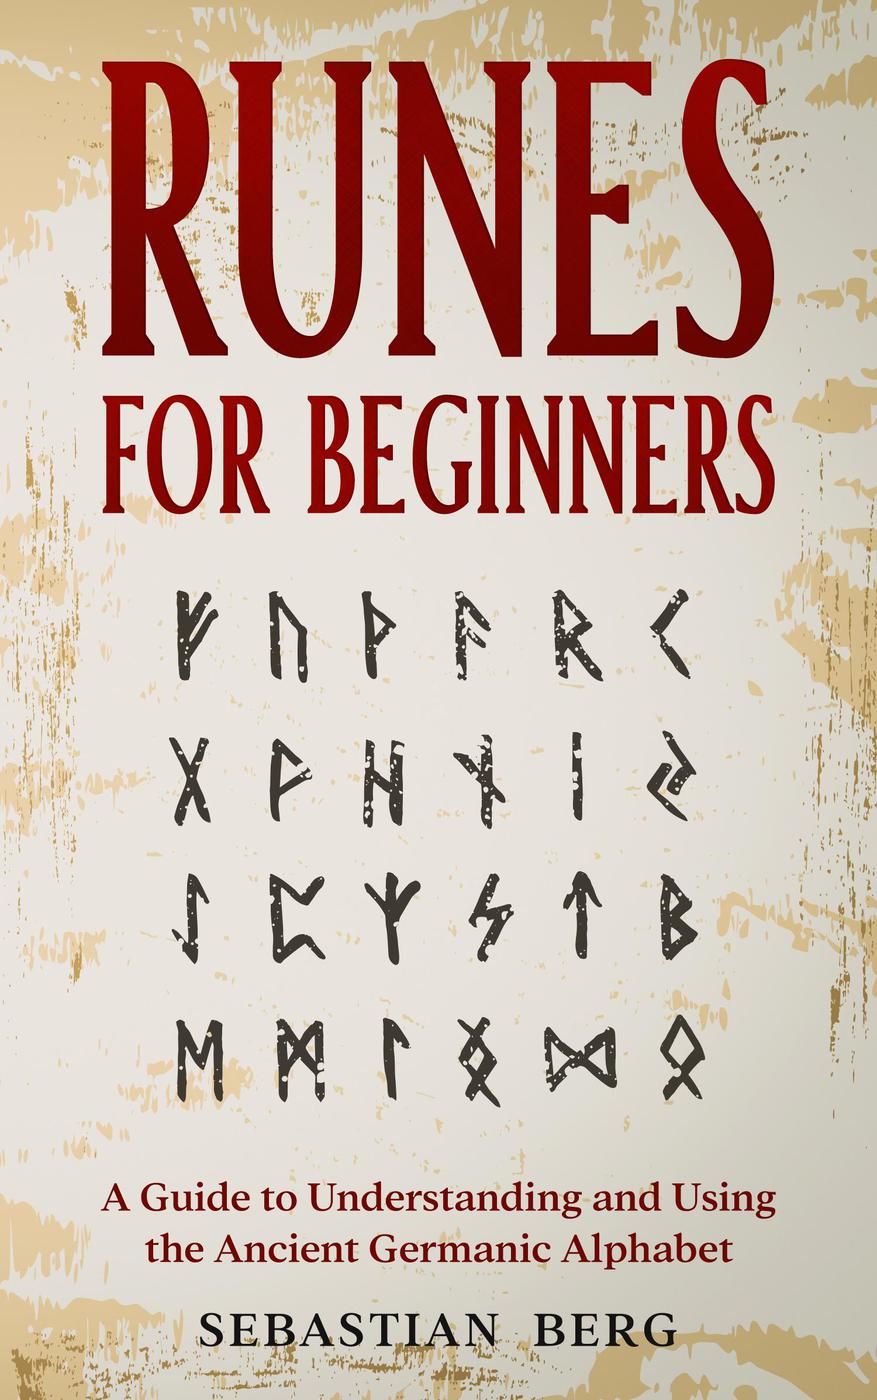 Runes for Beginners: A Guide to Understanding and Using the Ancient